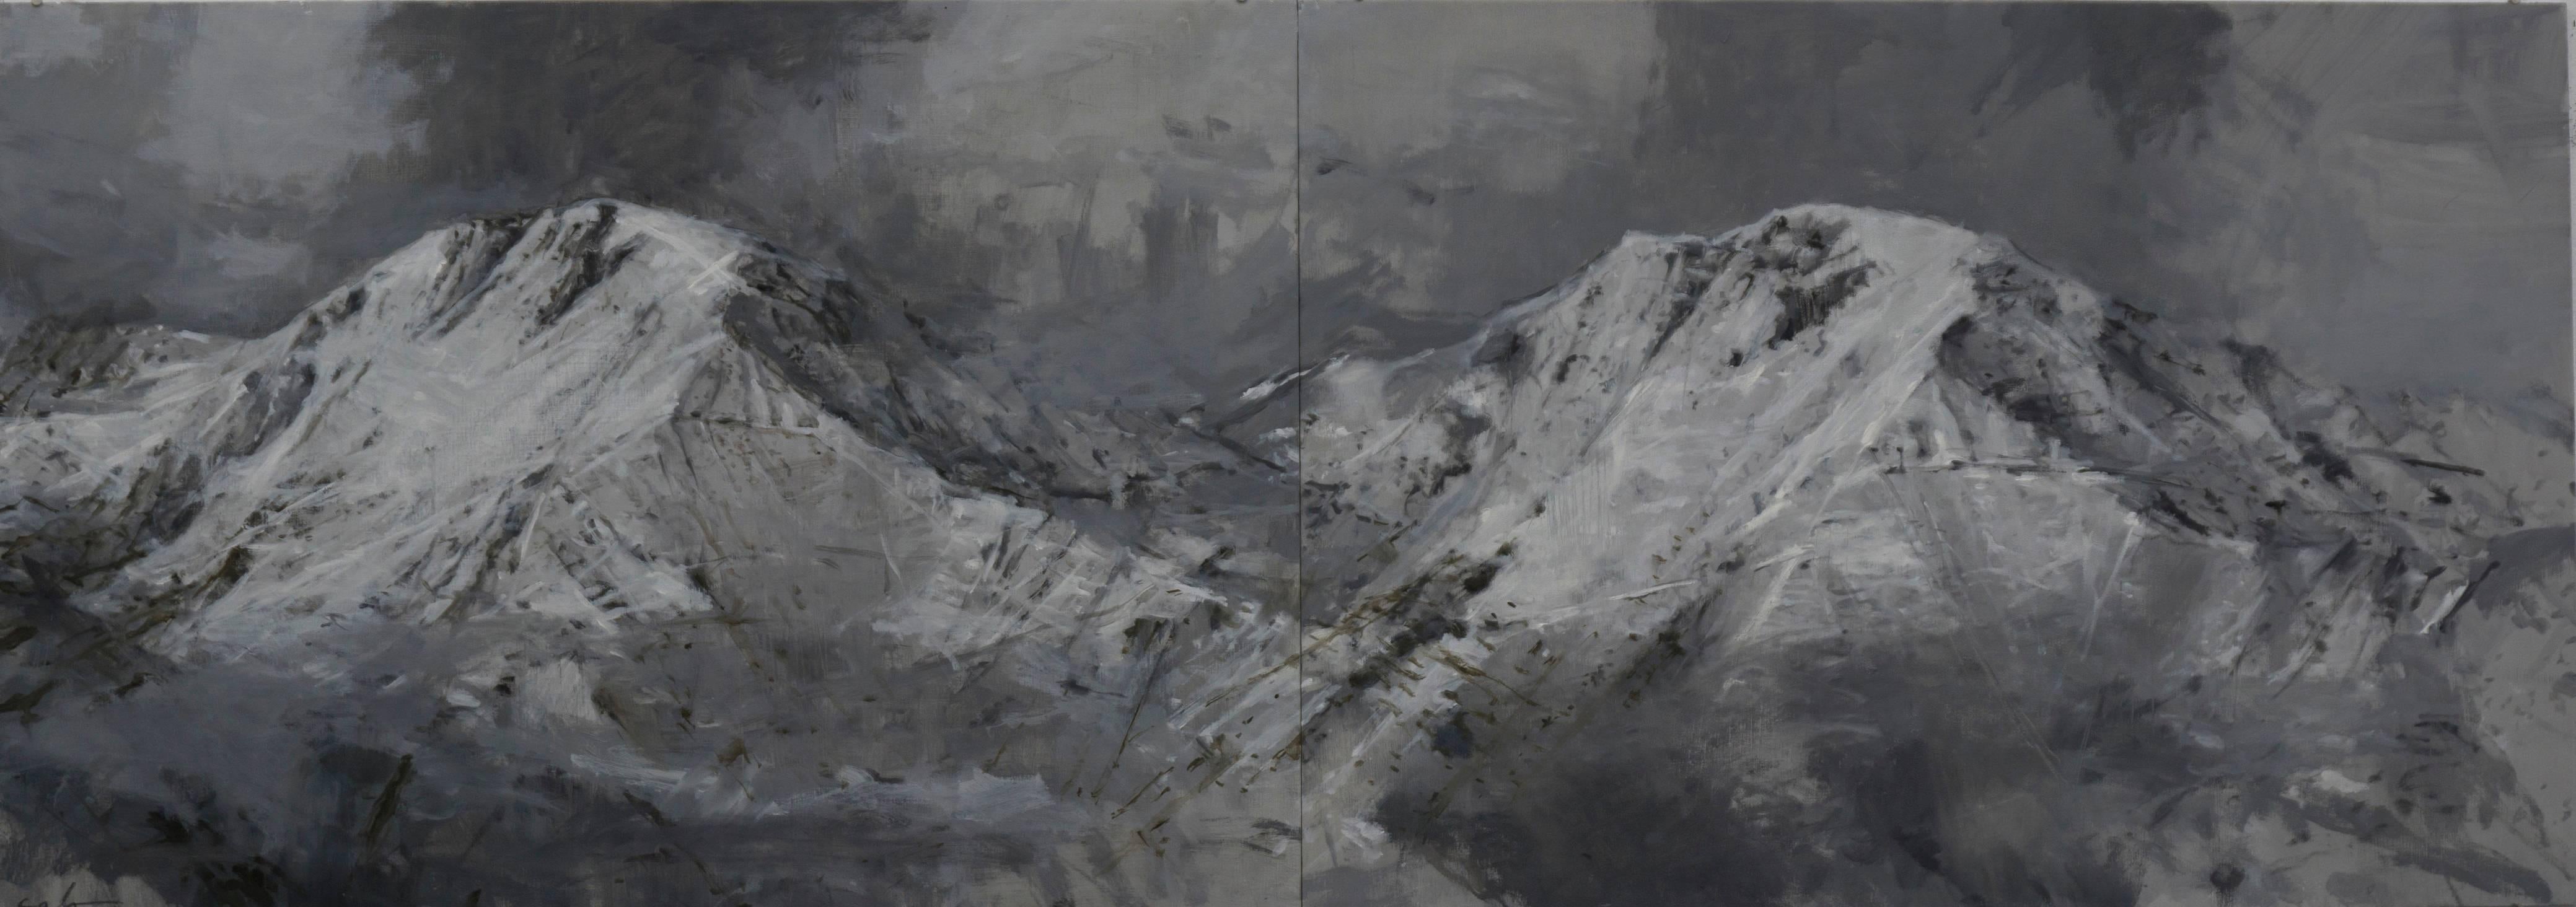 Twin Mountains (Snow series), Oil on wood, 46 x 130 cm, by Spanish contemporary artist Calo Carratalá. This work represents a mountainous winter landscape in the Pyrenean valley of Bénasque. Two high imposing and rocky summits, gently lit by the